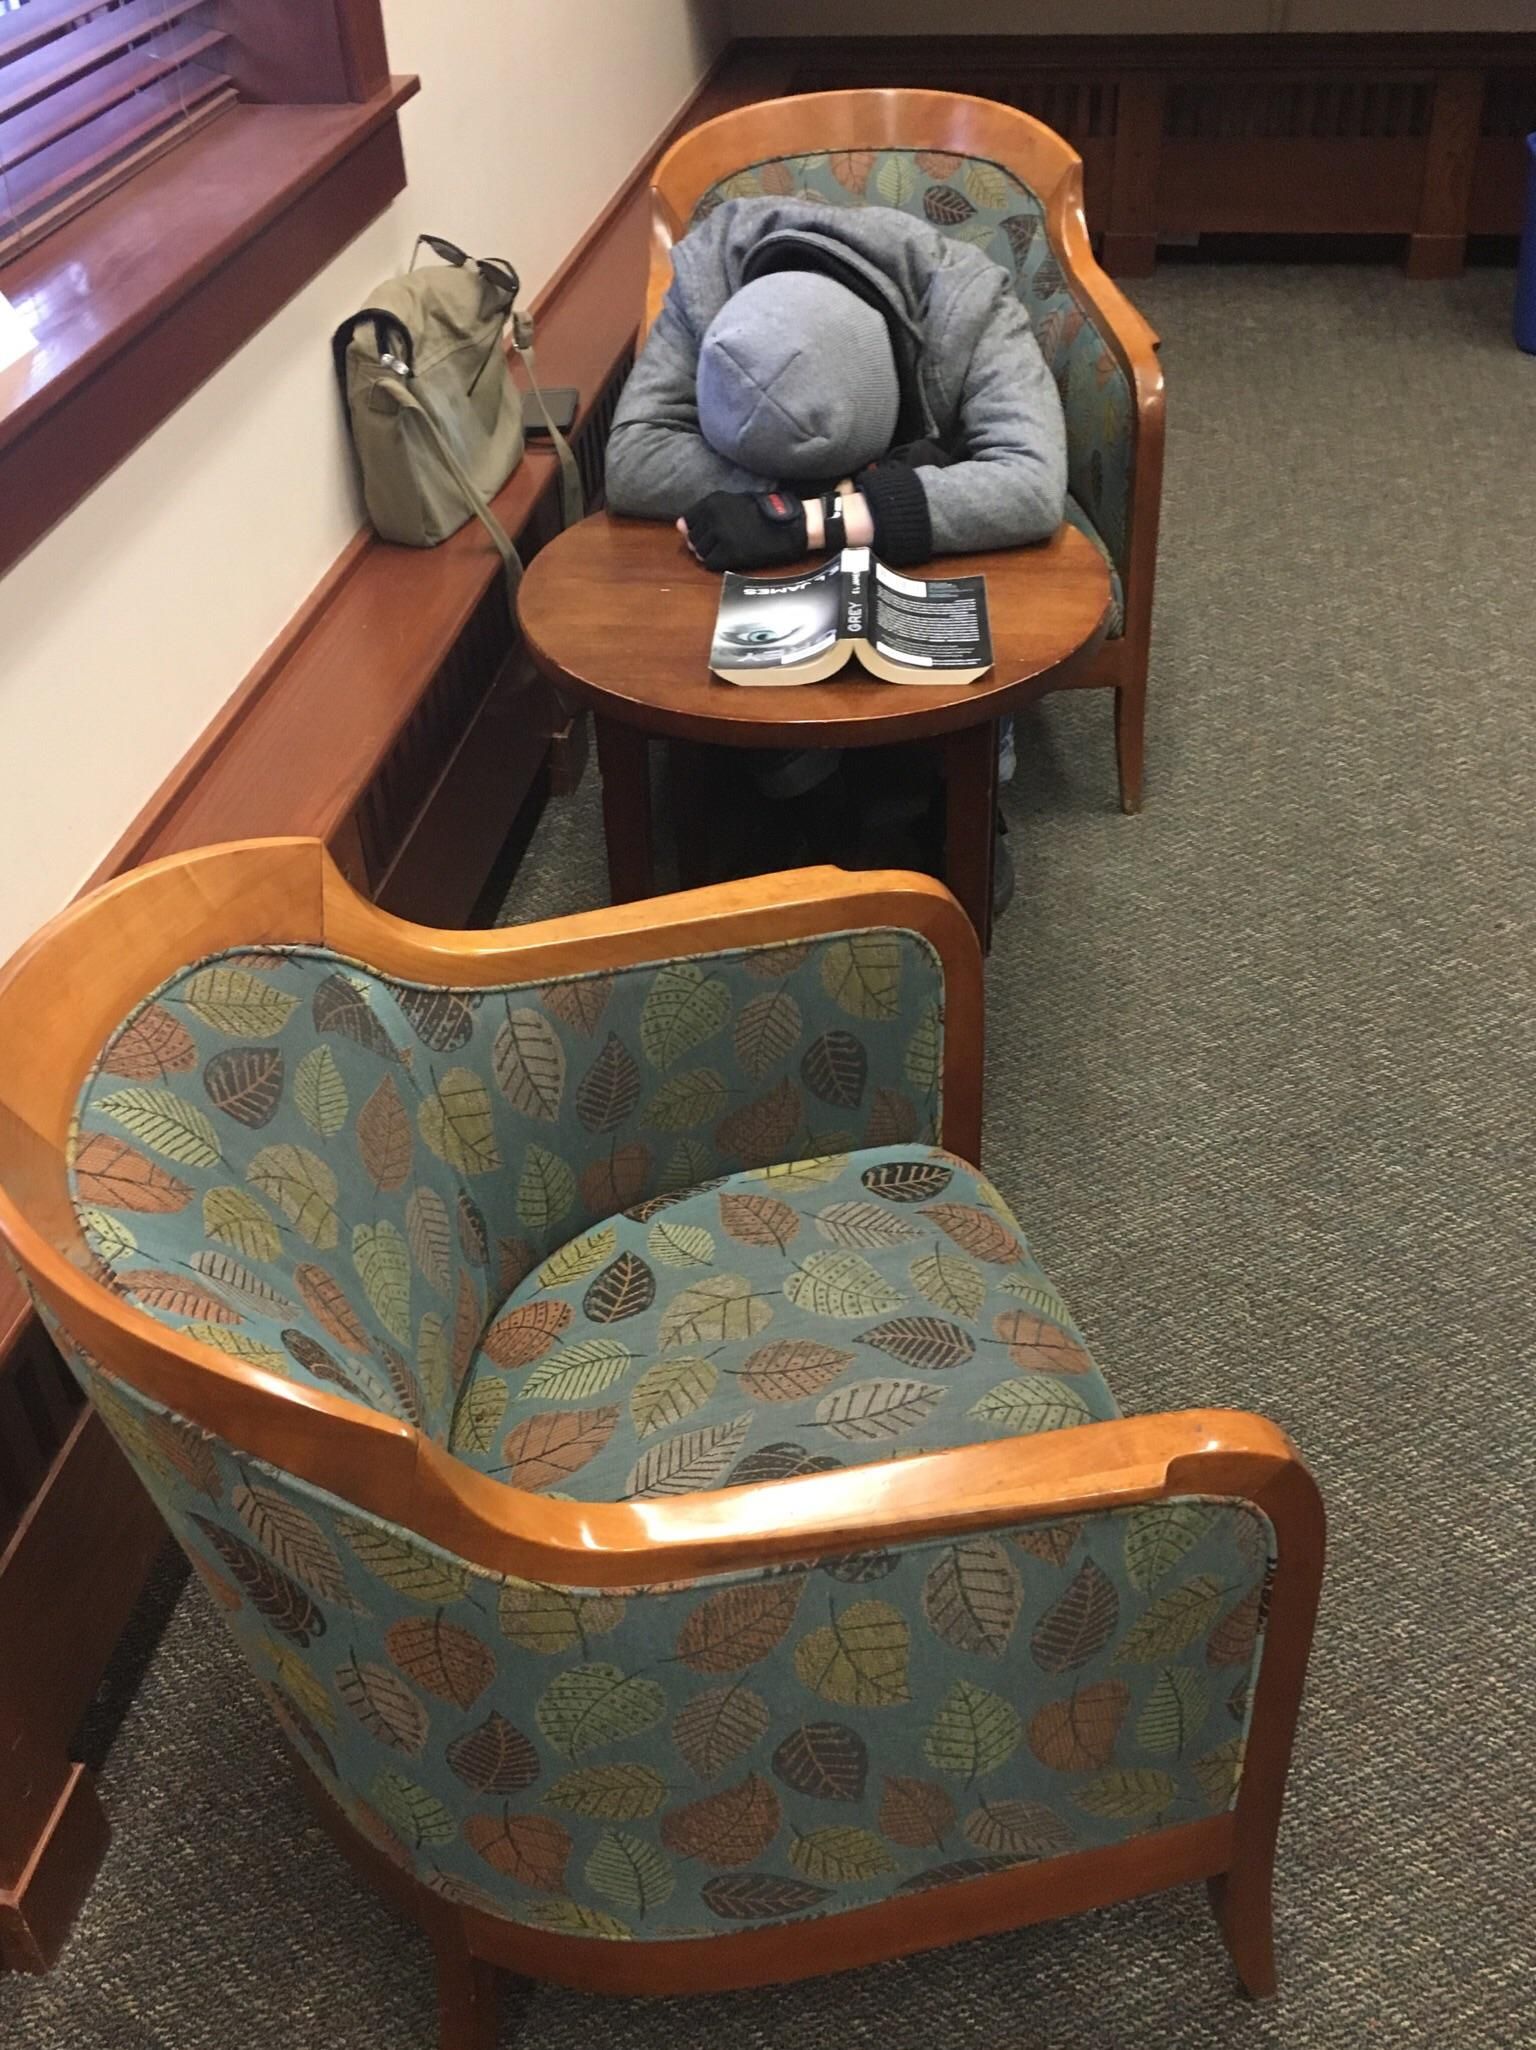 My roommate fell asleep at the library so I put 50 Shades of Grey in front of him